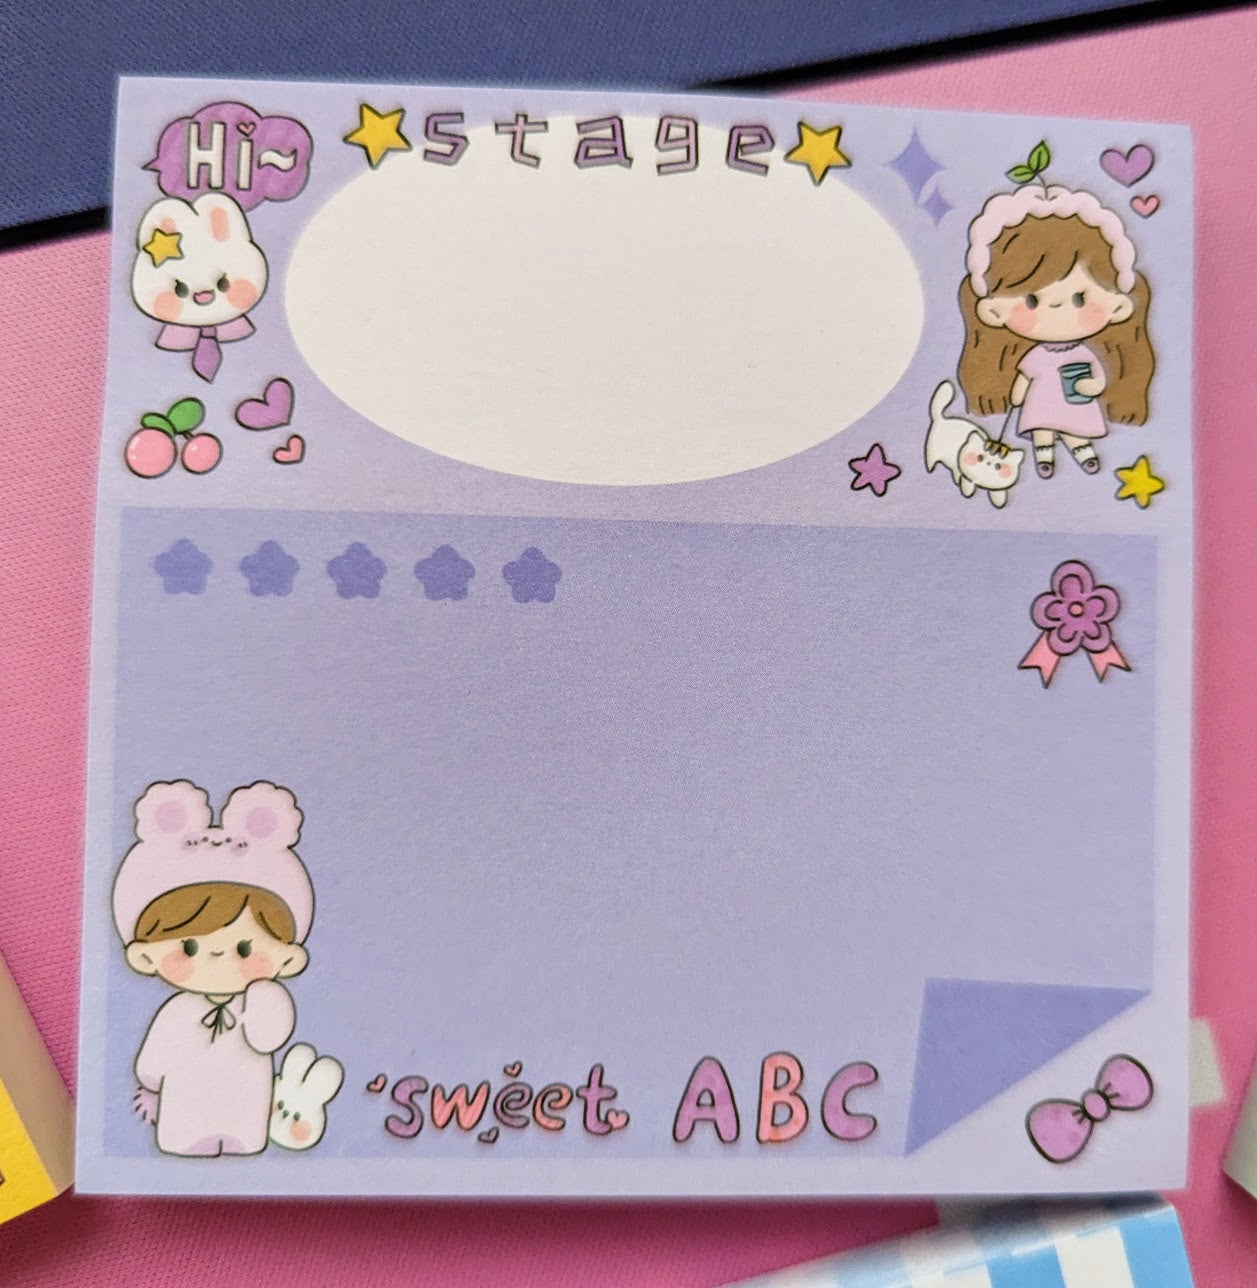 Kawaii Stickers! Great for your planner, journal and even scrapbooking